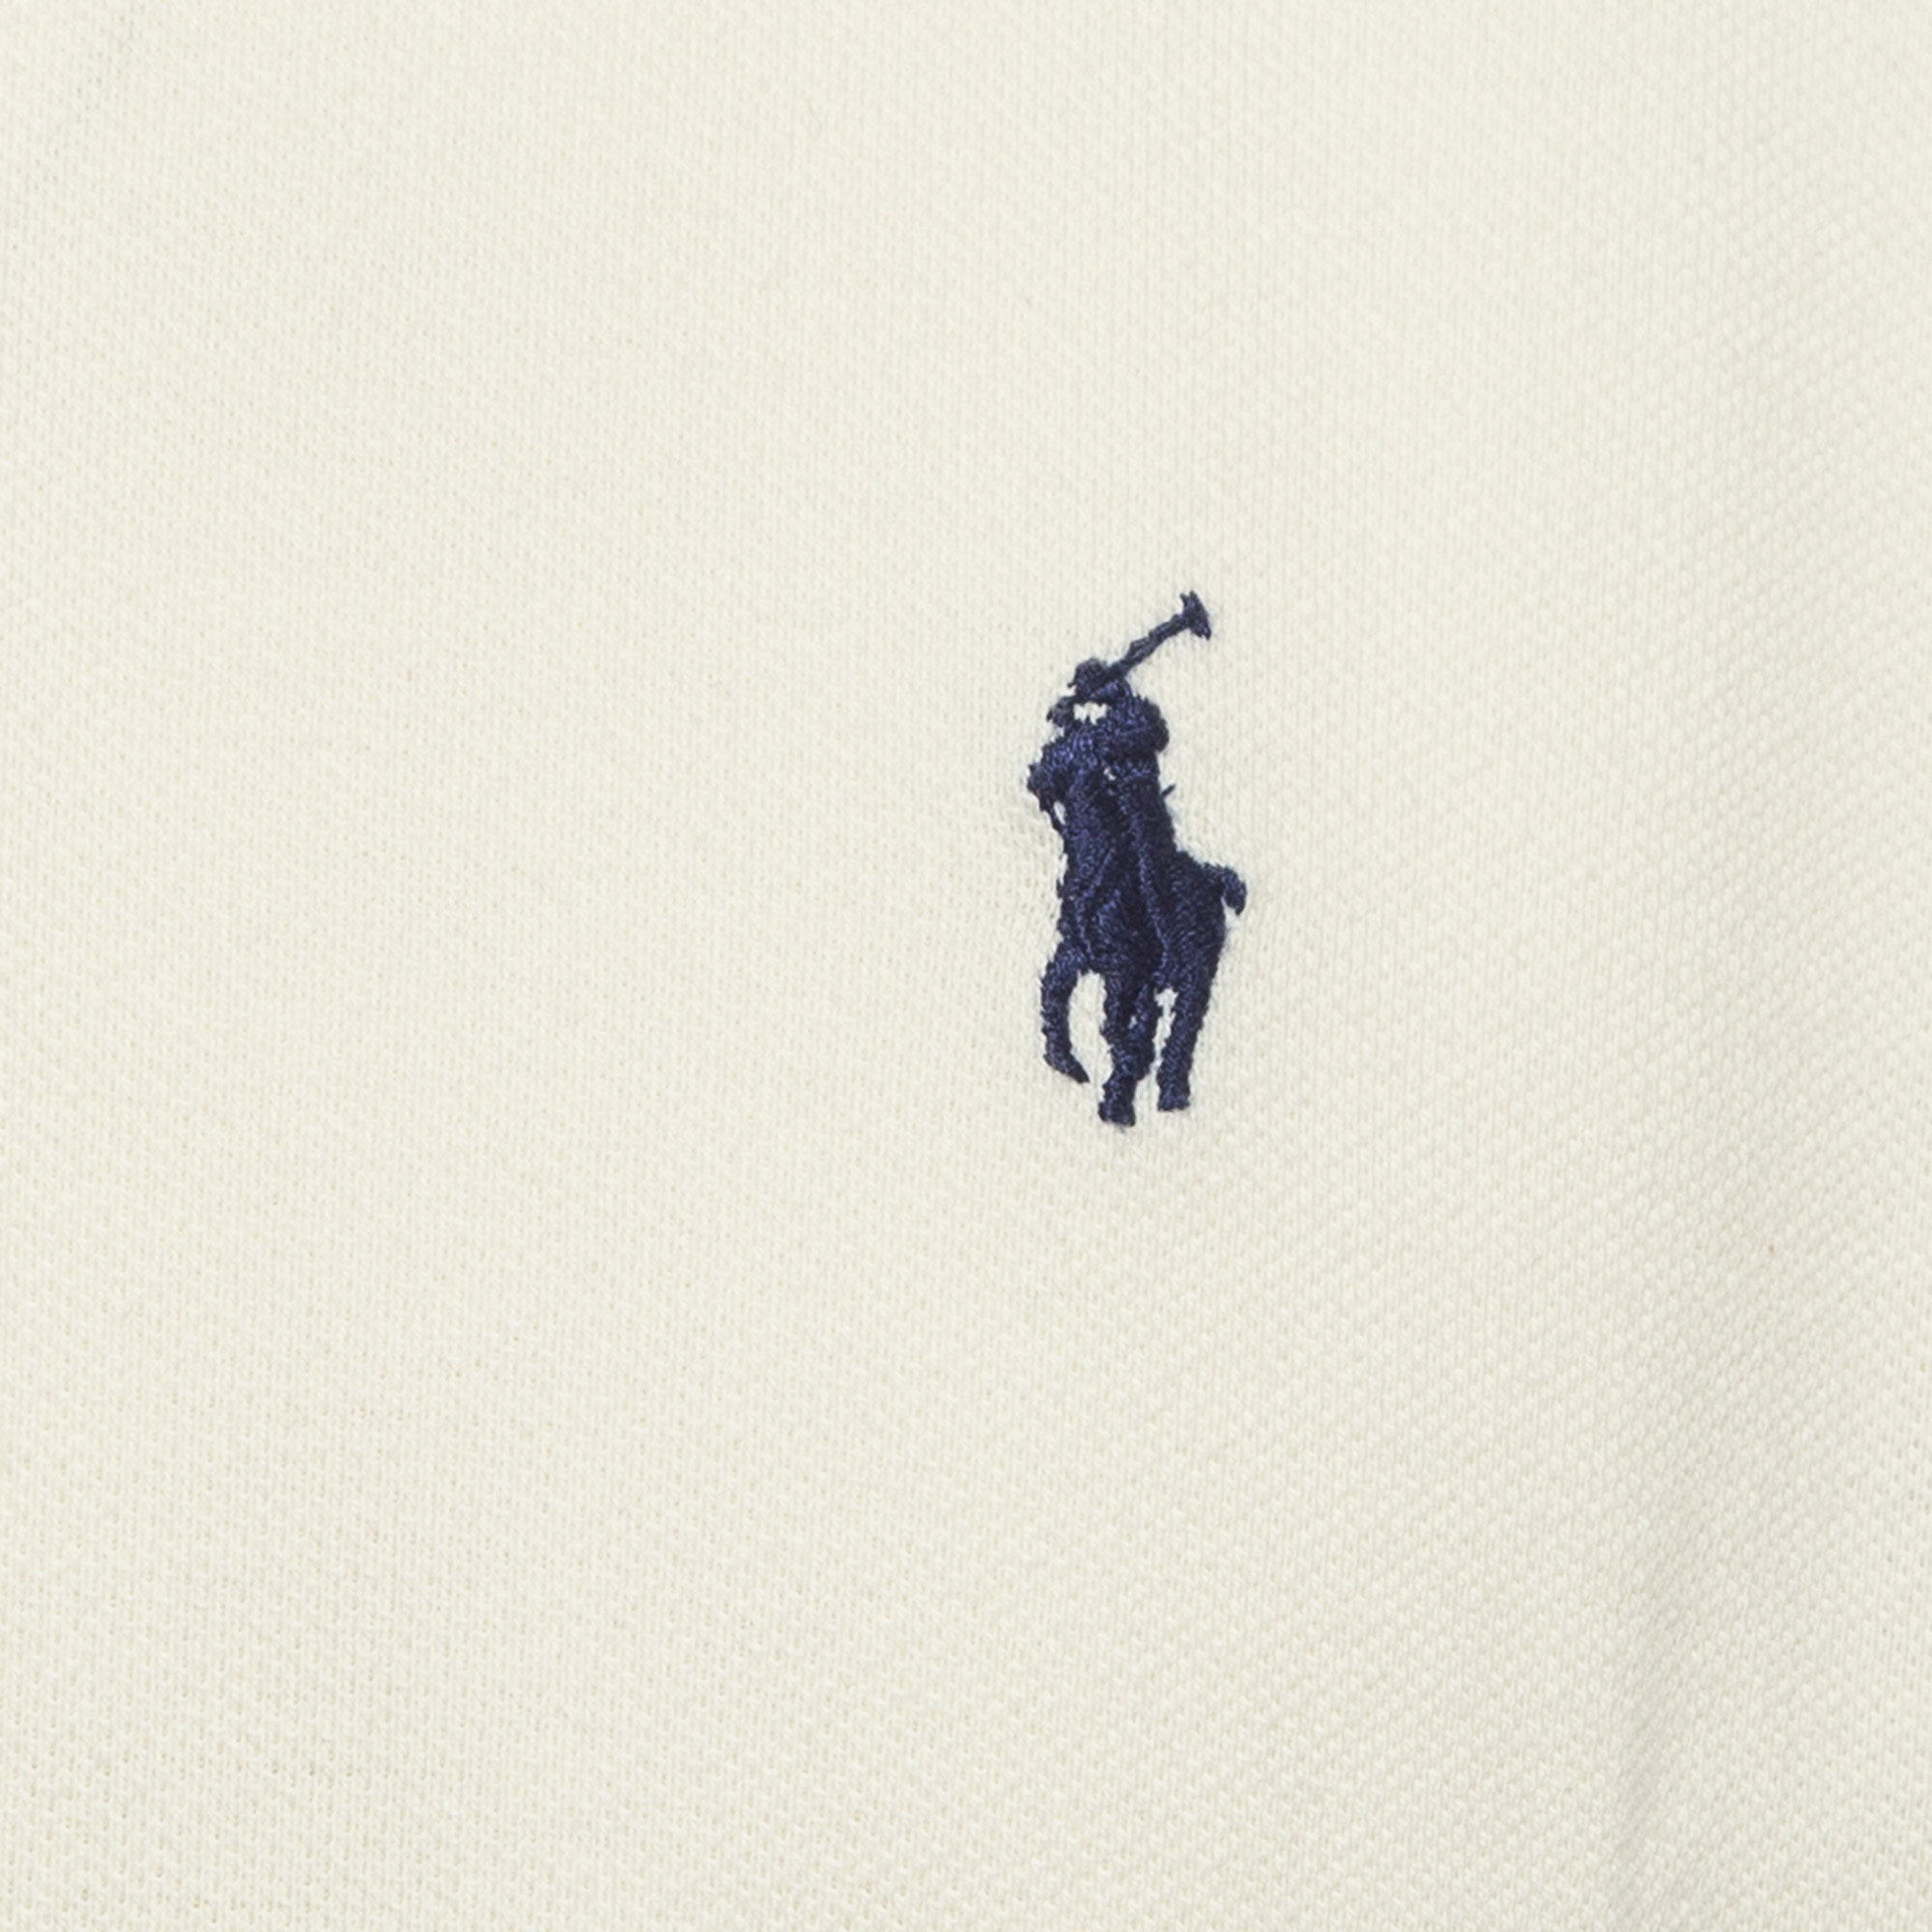 Polo Ralph Lauren Off White Logo Embroidered Cotton Polo T-Shirt L